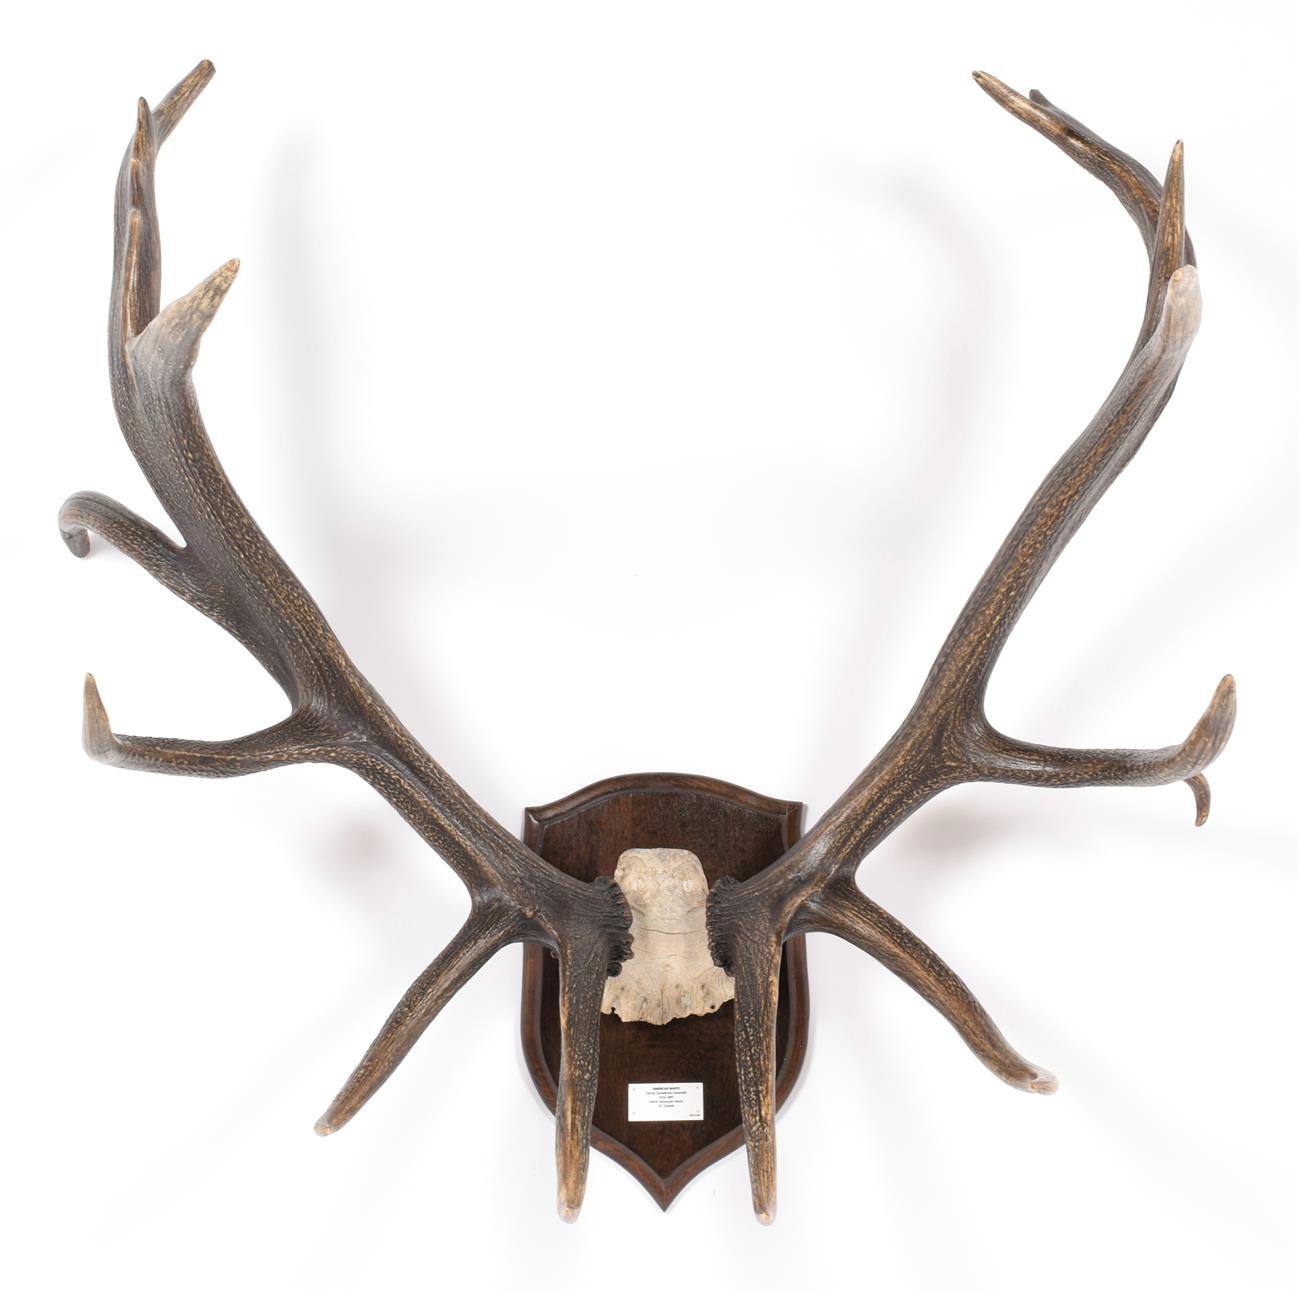 Lot 72 - Taxidermy: North American Wapiti or Elk (Cervus canadensis roosevelti), dated 1885, North Vancouver